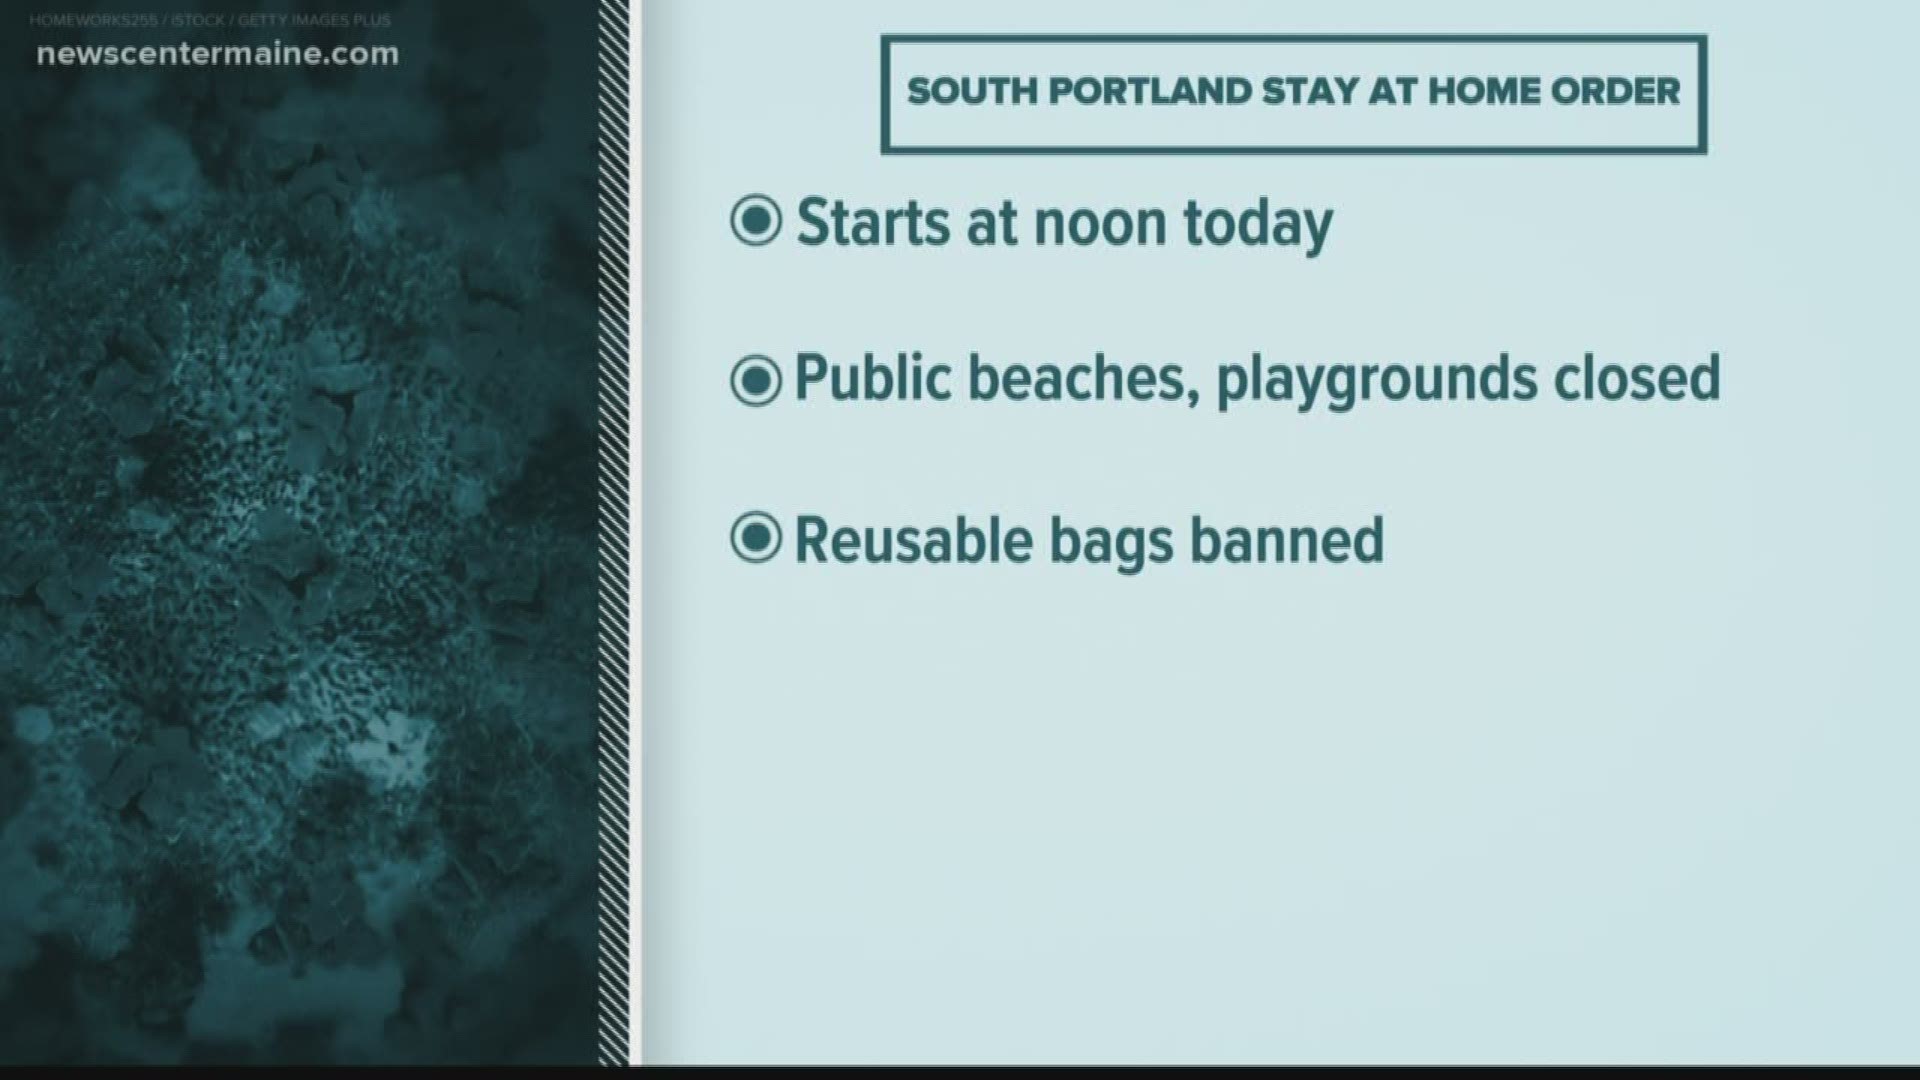 South Portland and New Hampshire have also issued Stay at Home orders effective Friday.